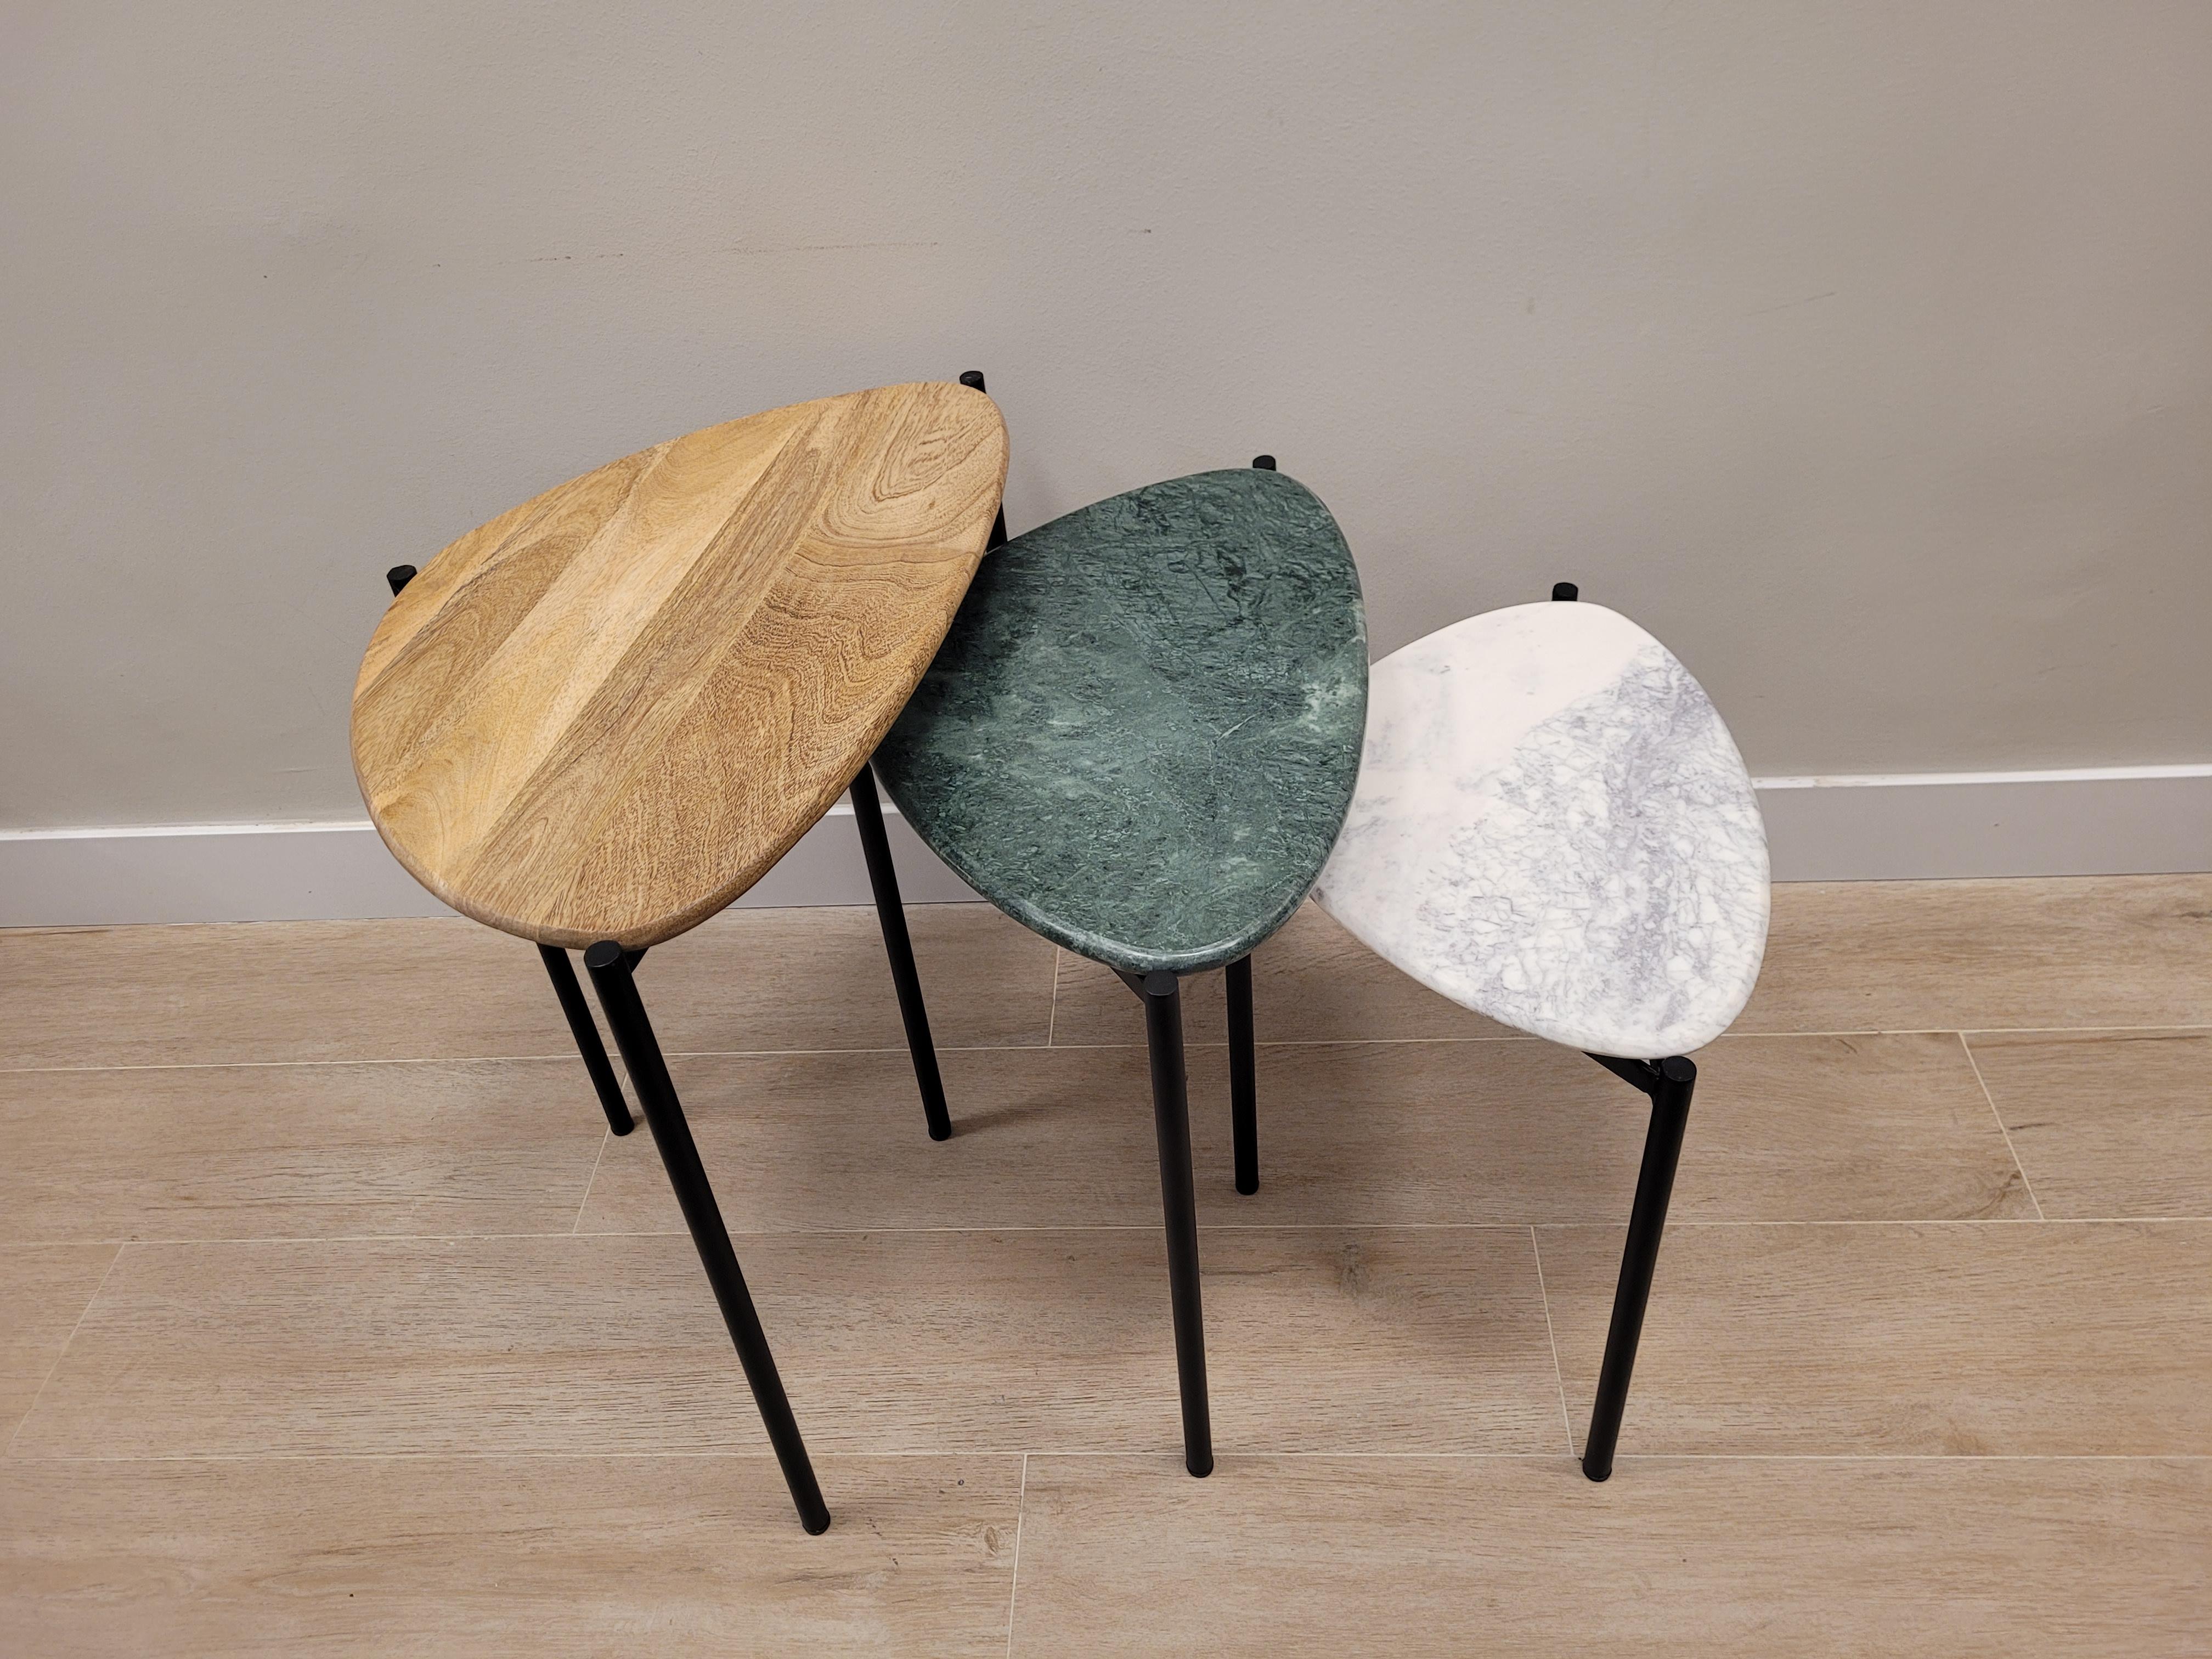 Contemporary Set of 3 End-Tables Green, White Marble and Wood 21st Century, Side Table